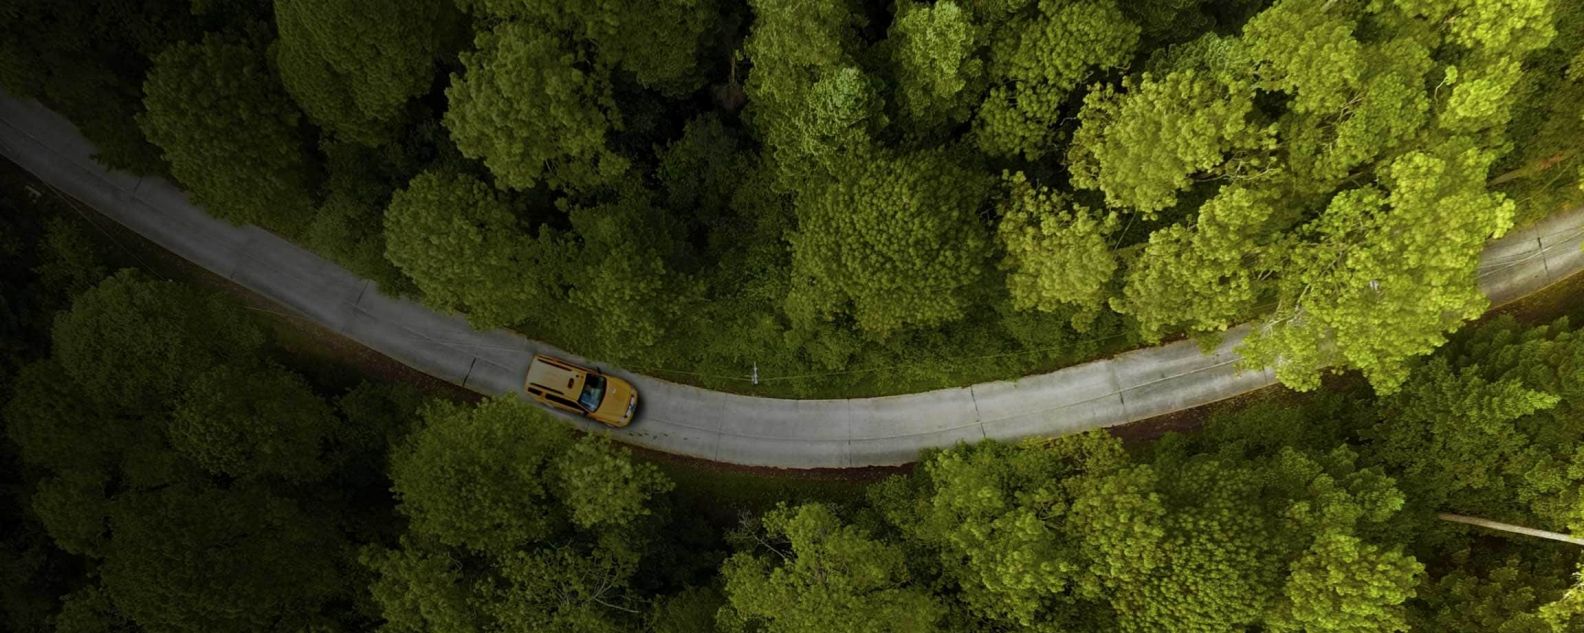 Aerial view of car driving on a road with trees on both sides